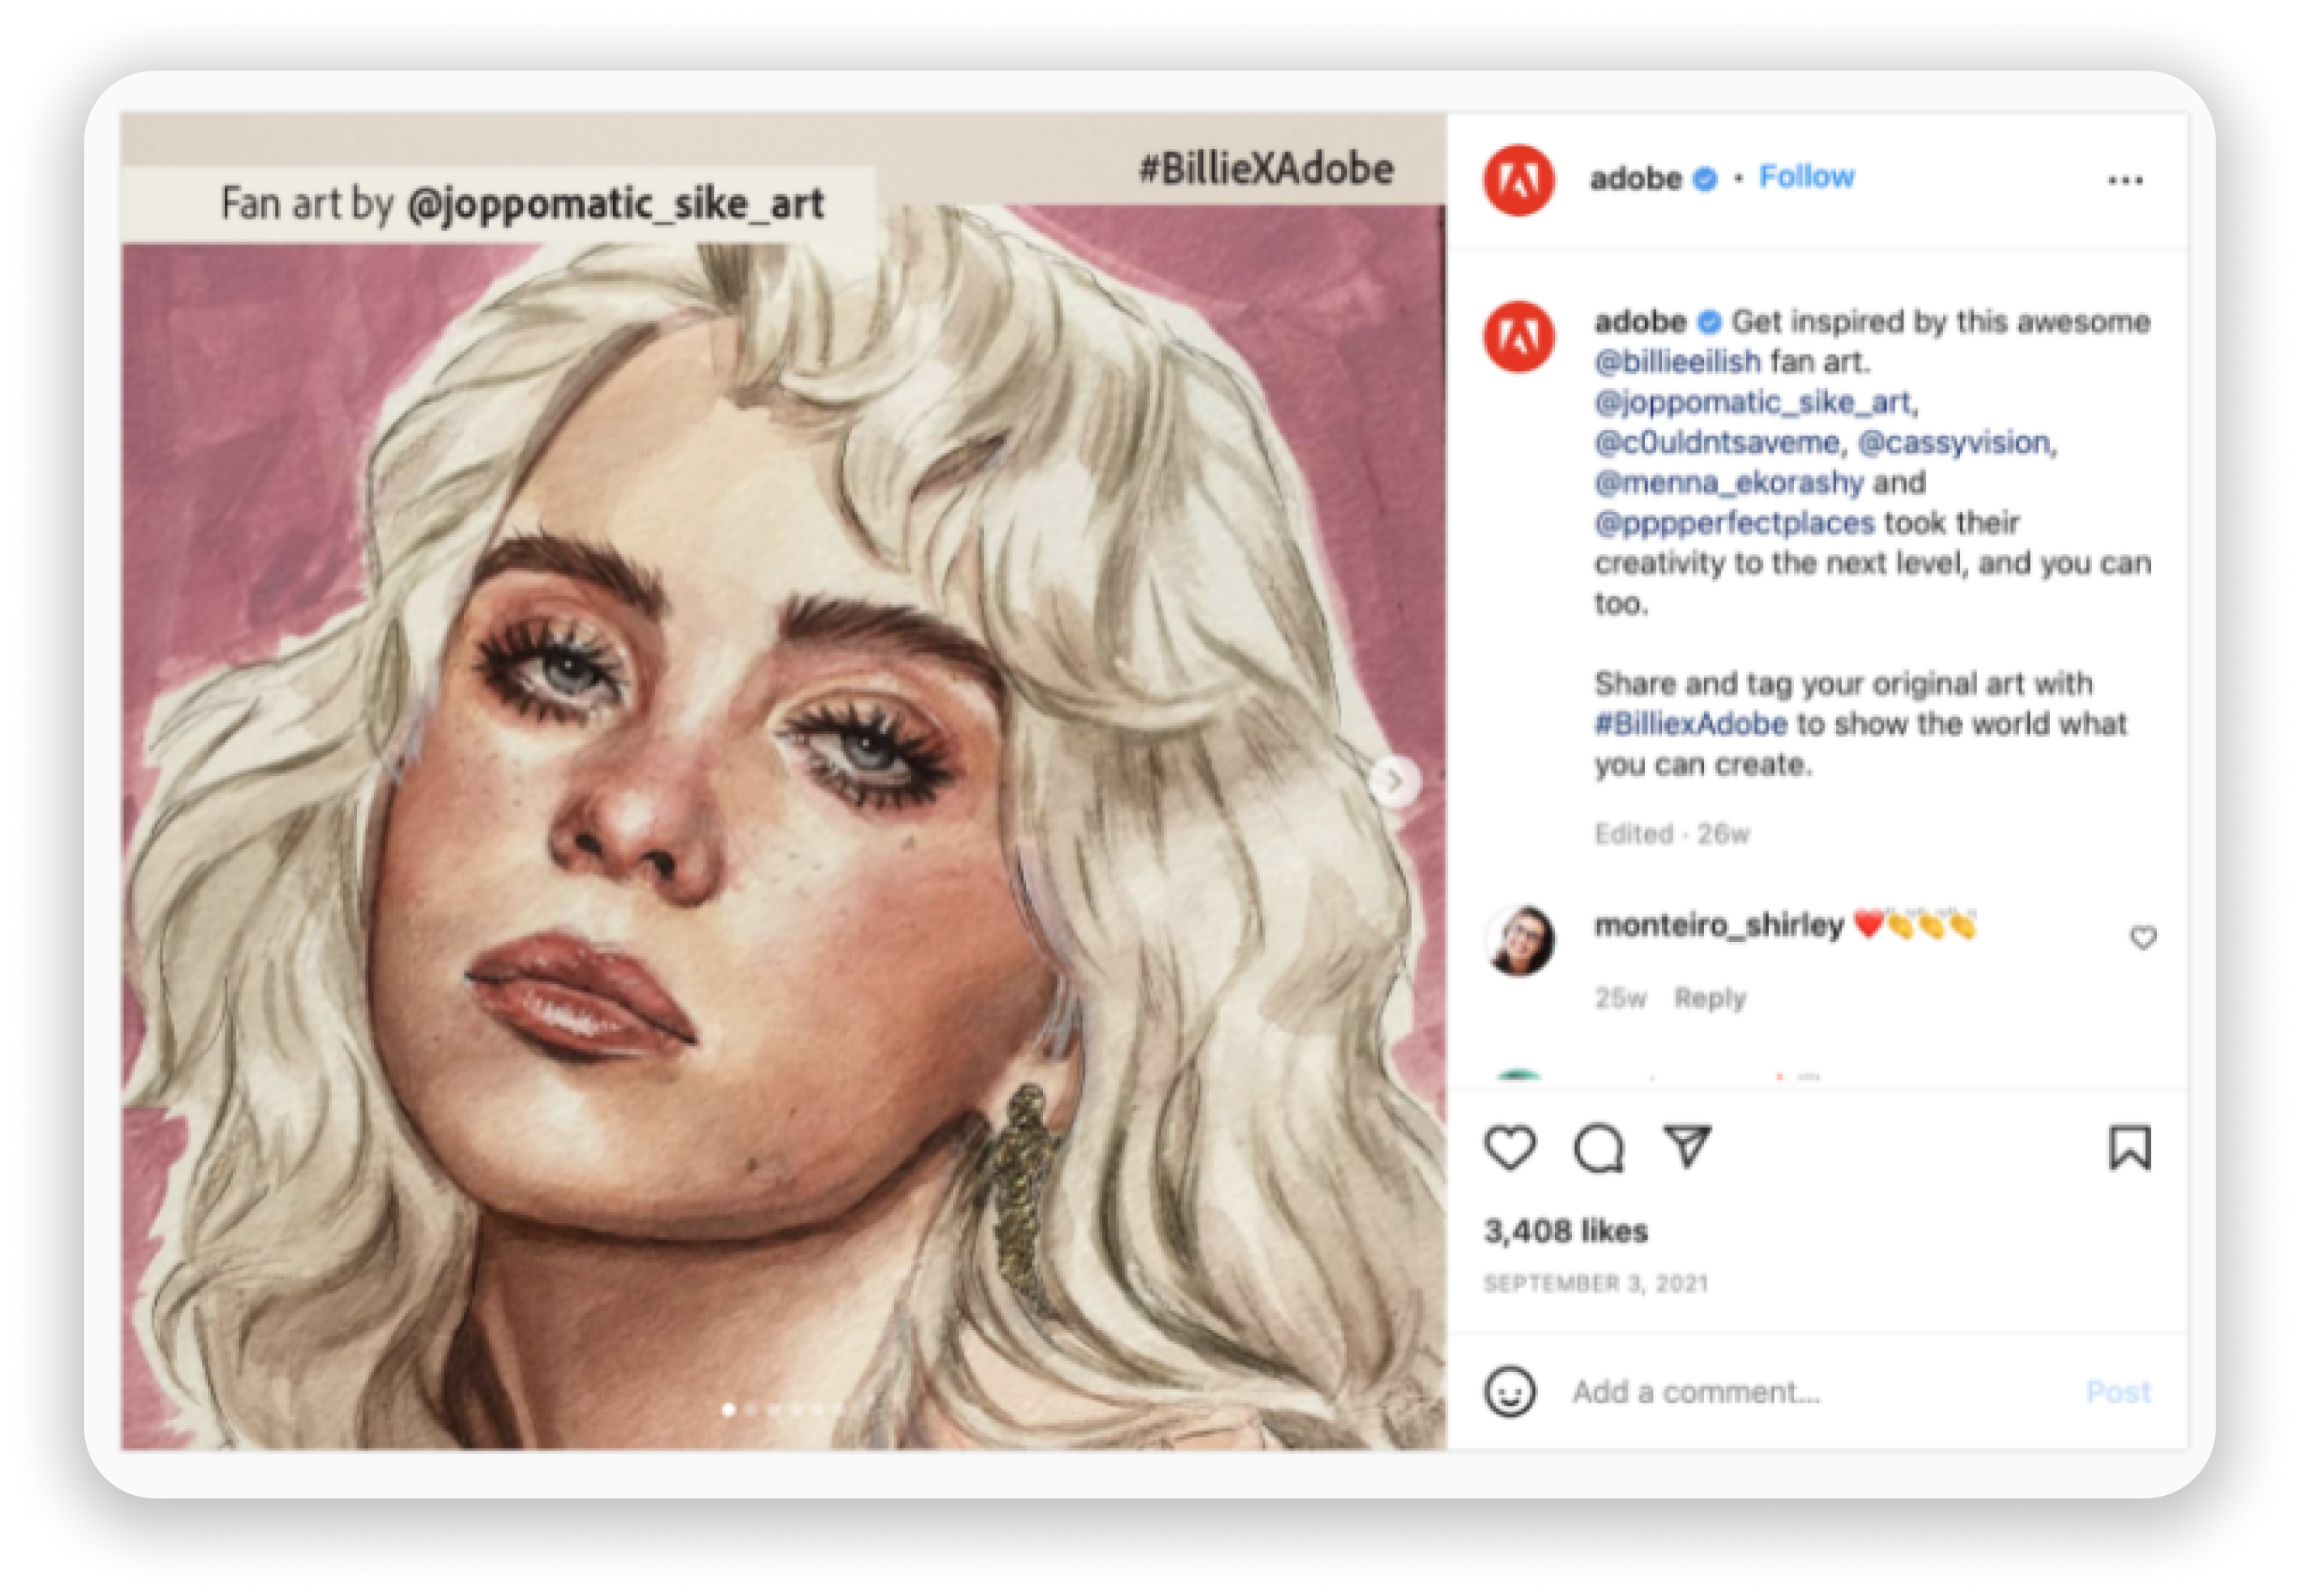 Adobe partnered with pop icon Billie Eilish and kickstarted a UGC campaign